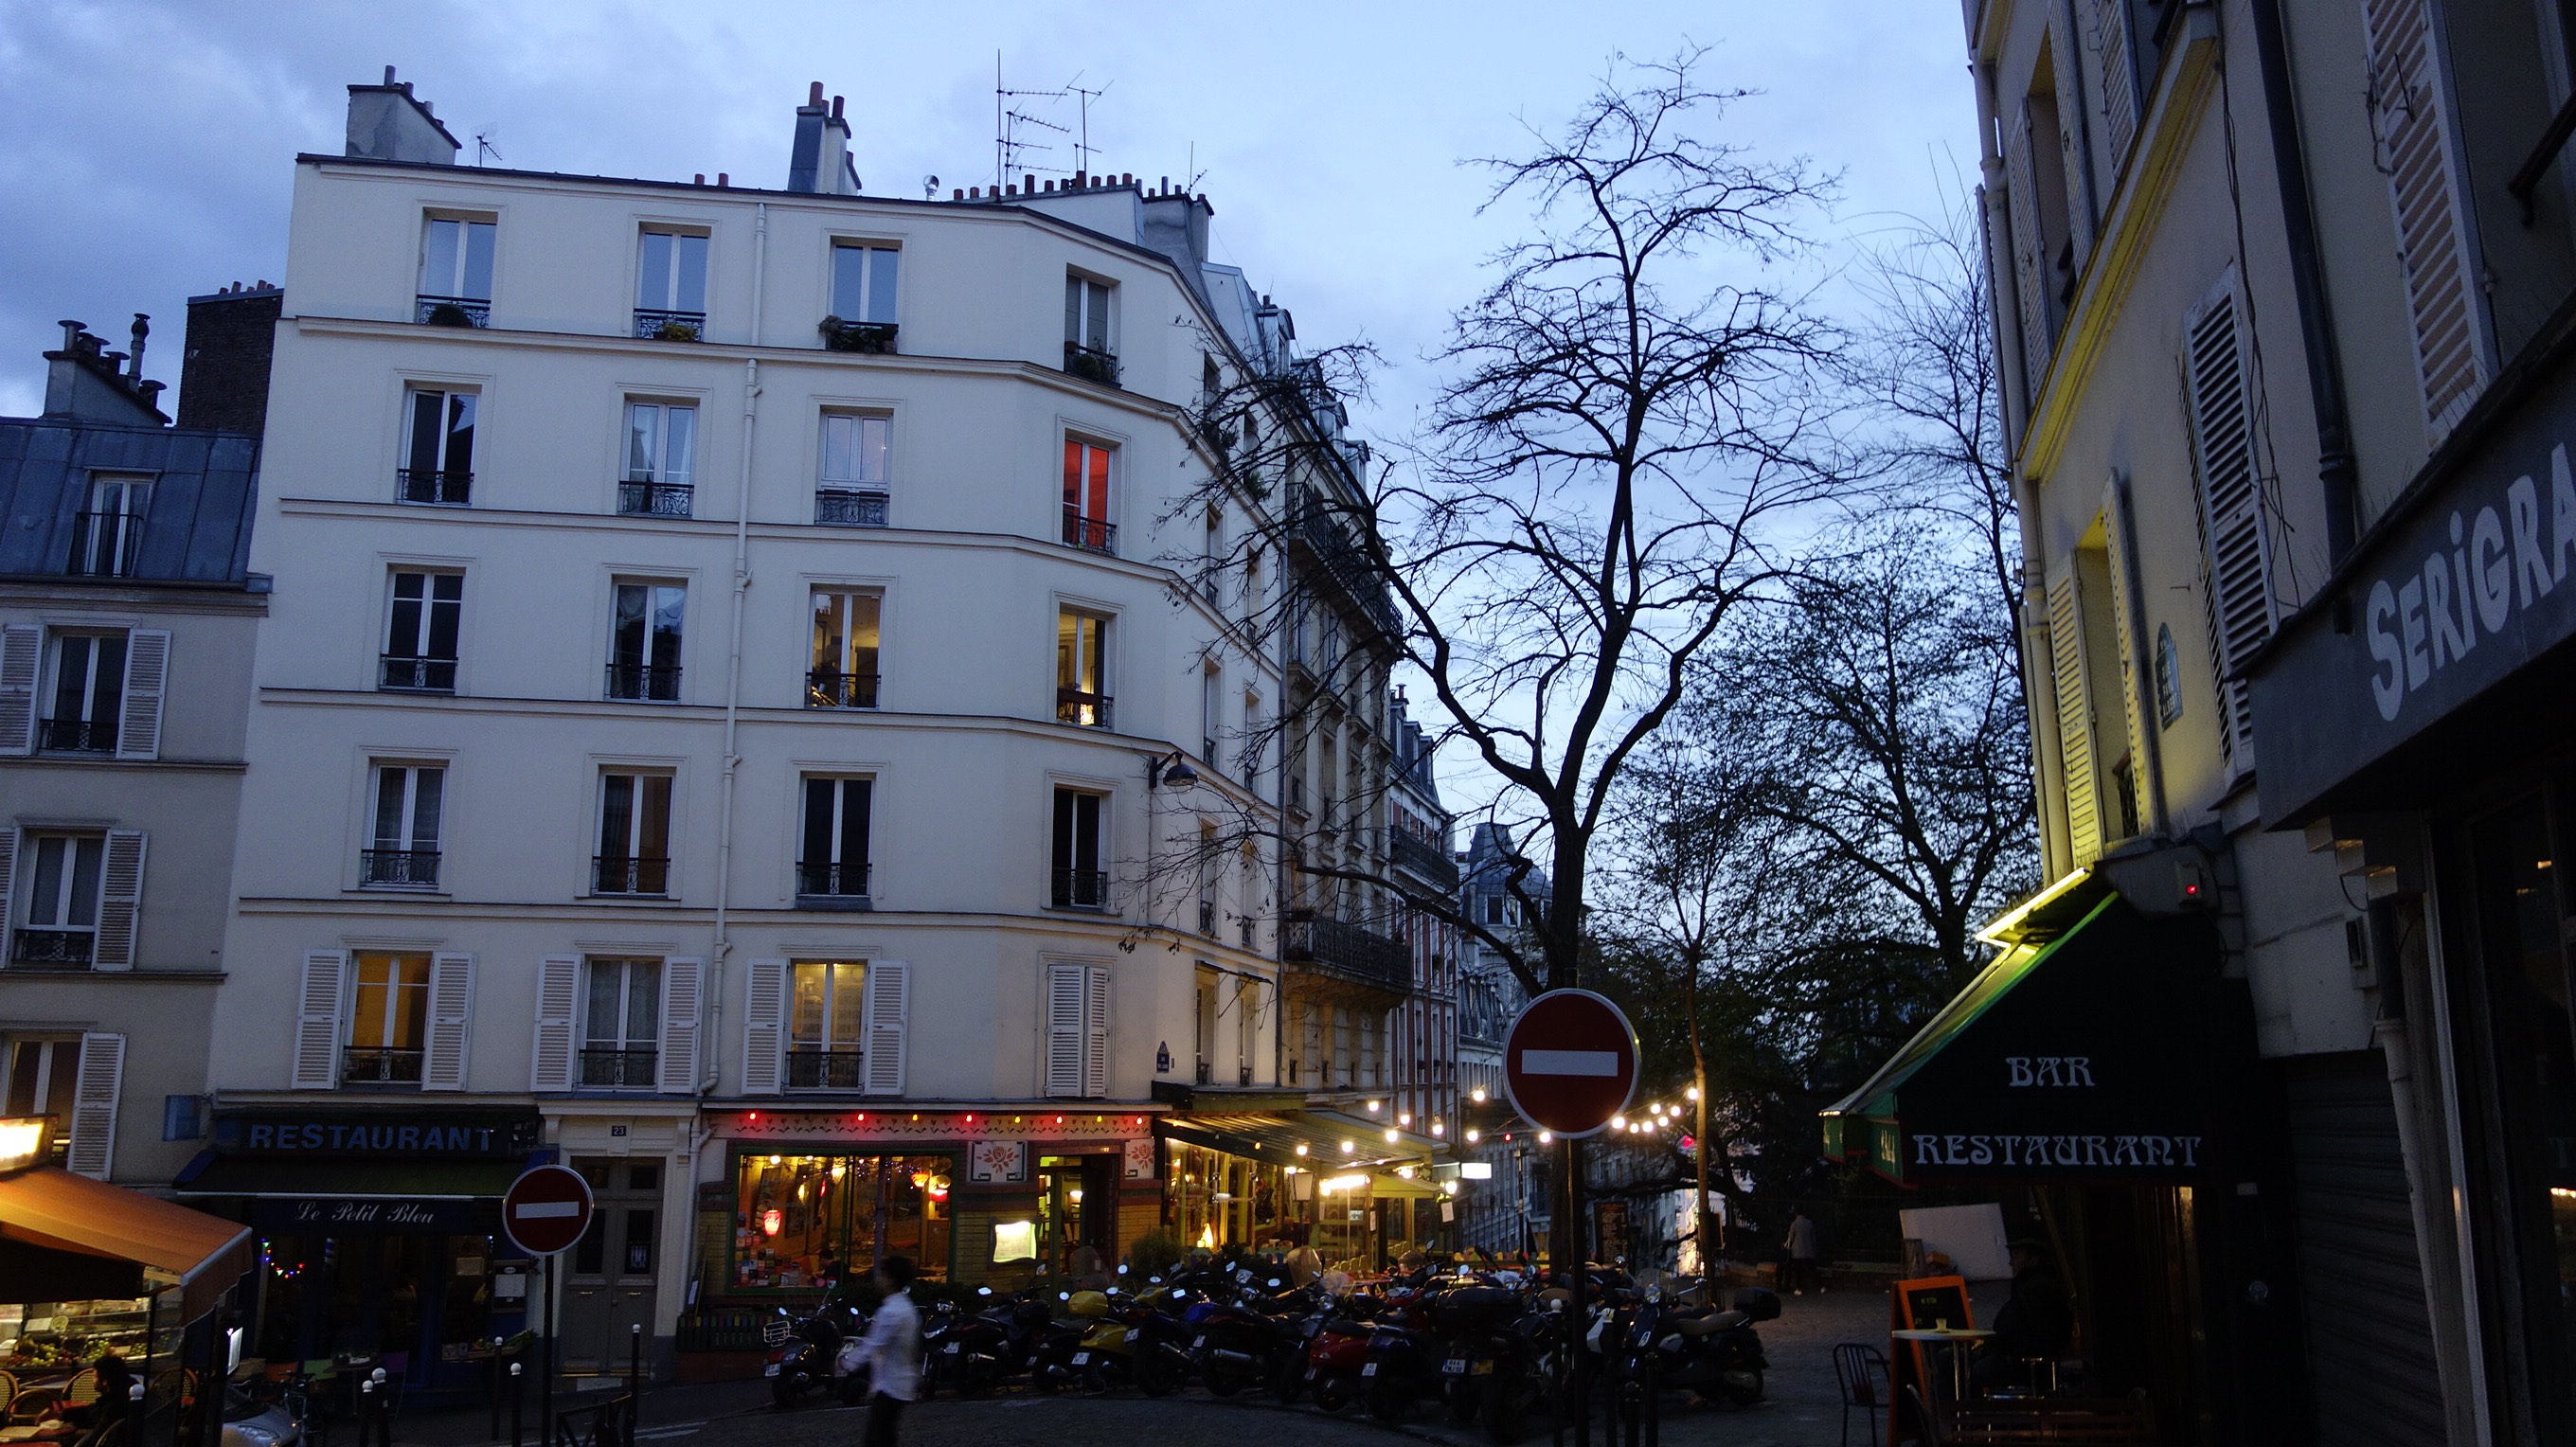 montmartre at night best to do with freinds | My parisian life